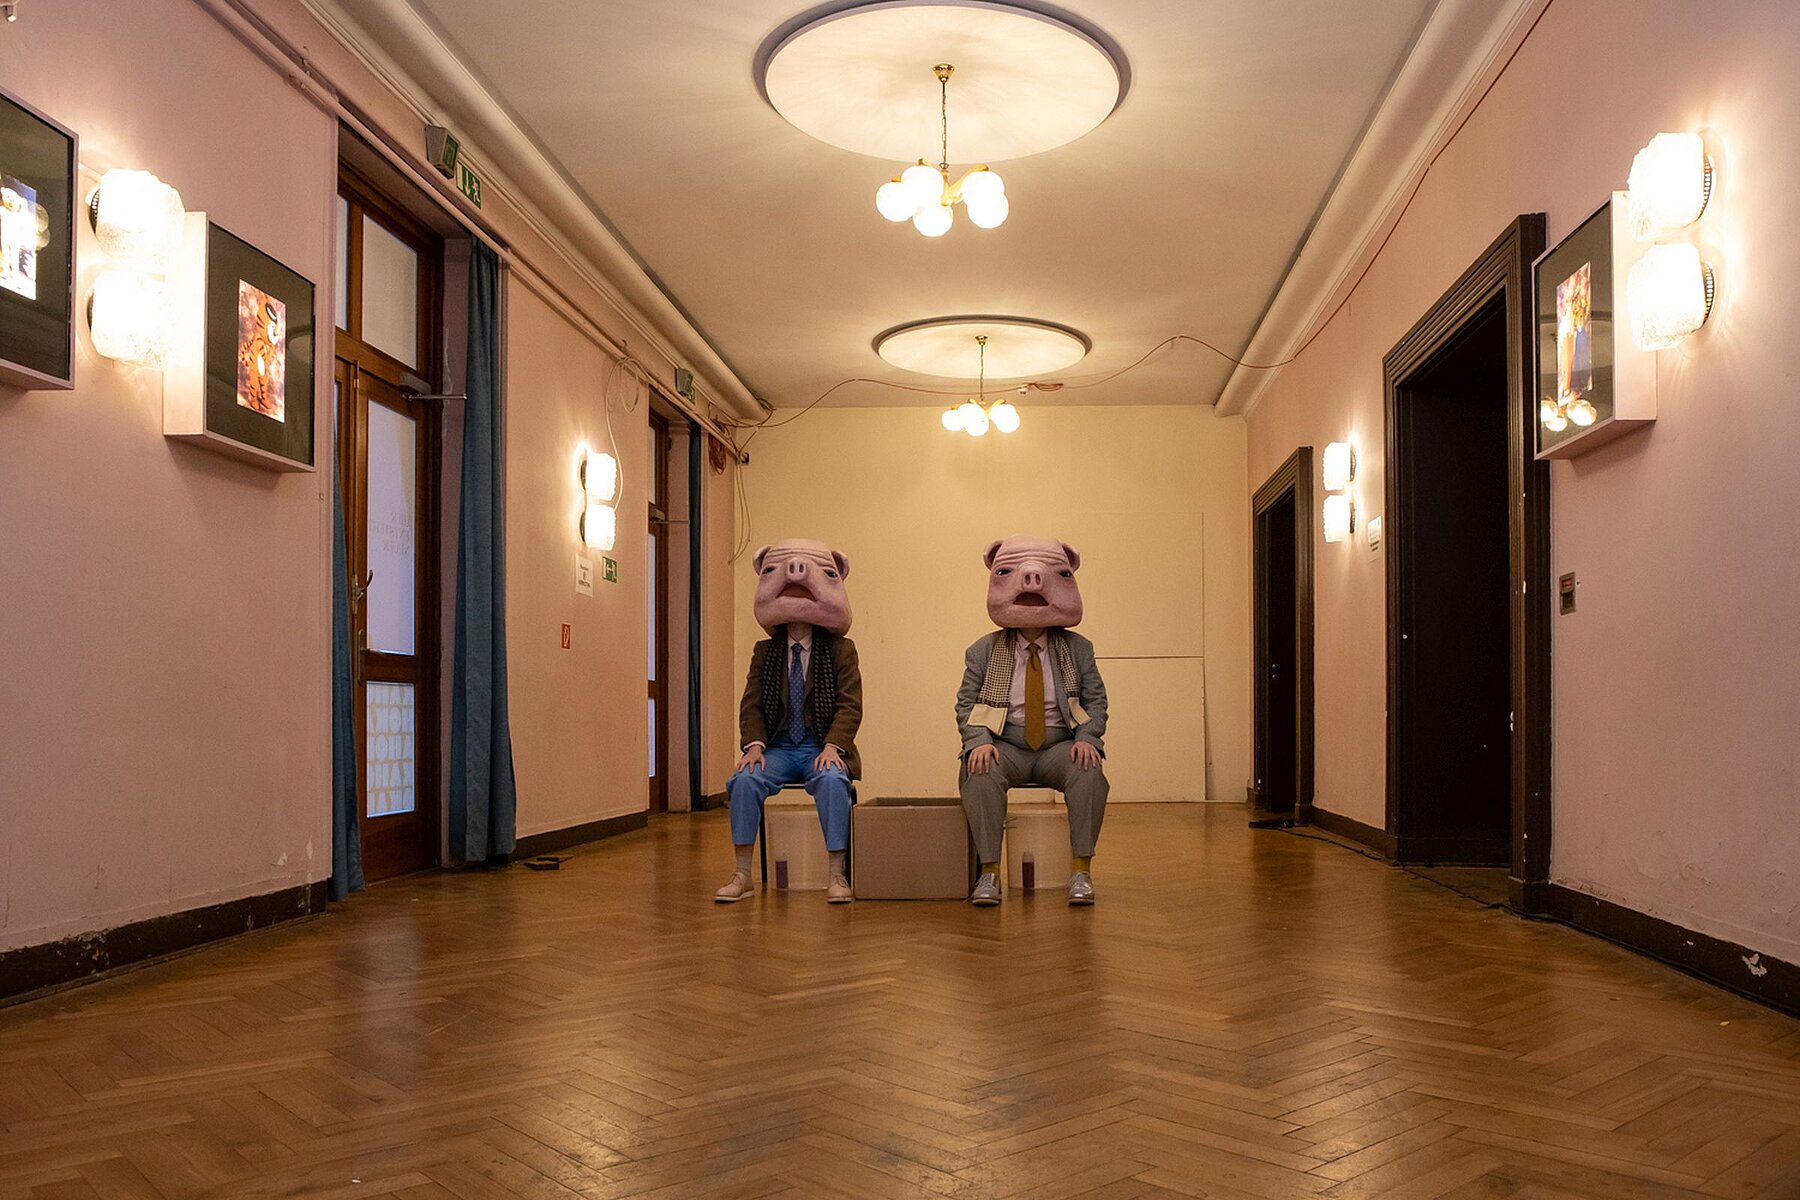 Two people with pig masks on their heads sit side-by-side on chairs in the middle of a room with a parquet floor.